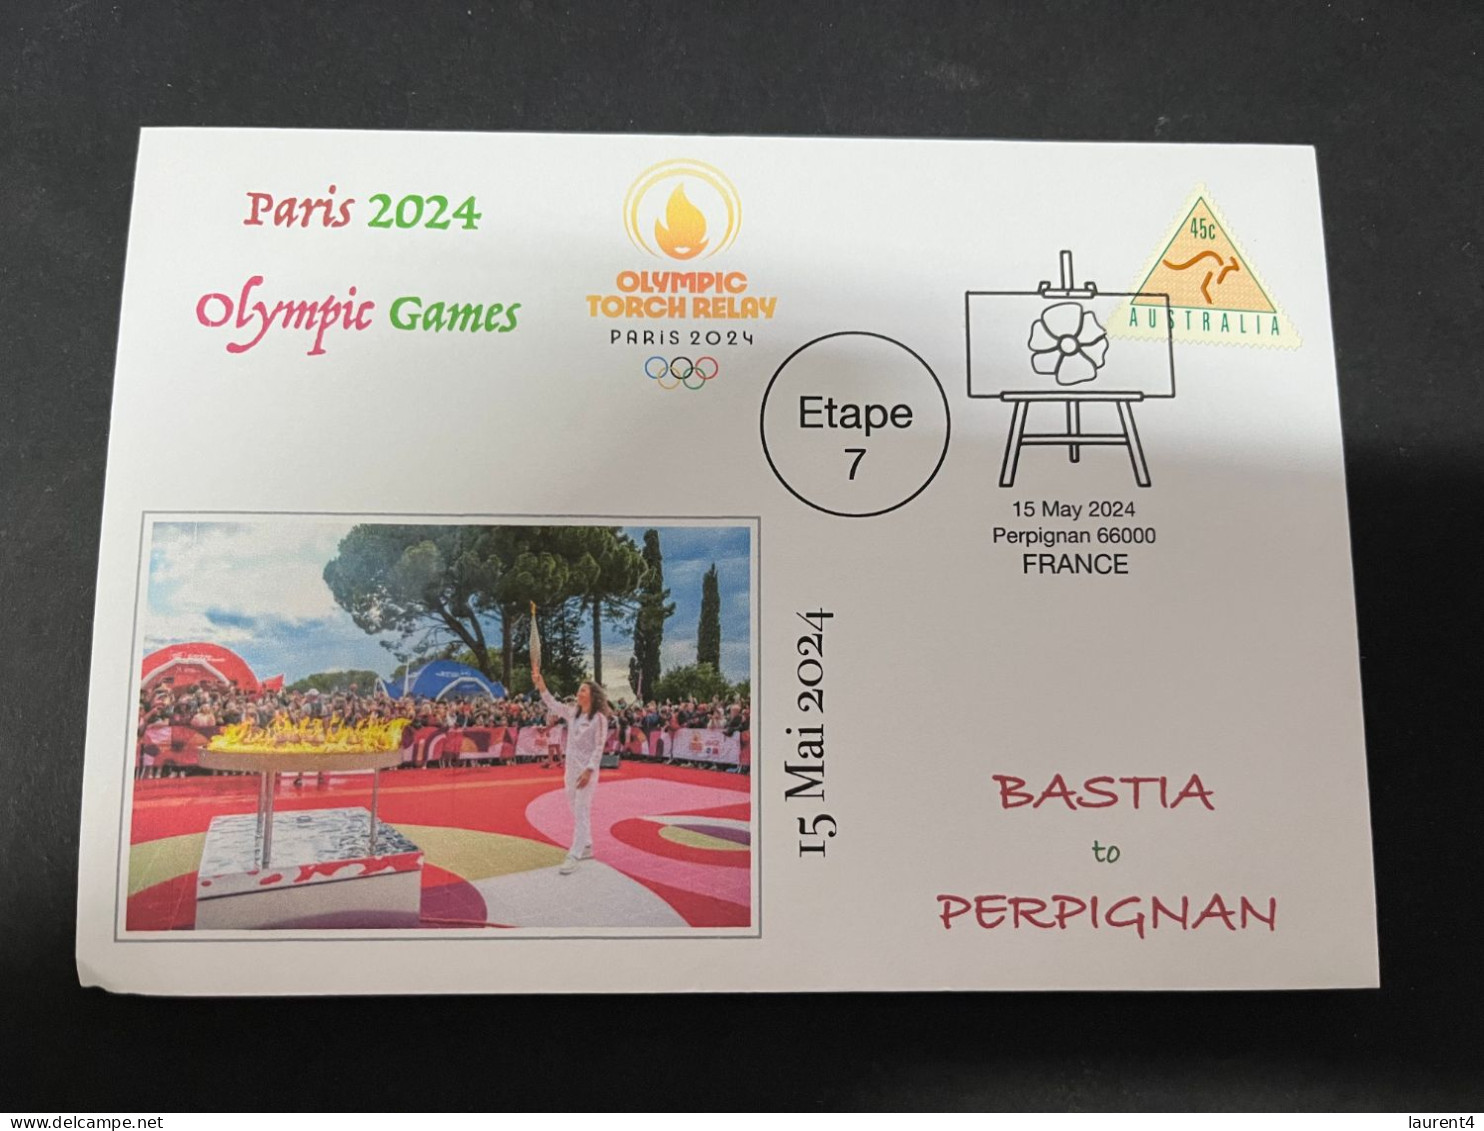 16-5-2024 (5 Z 17) Paris Olympic Games 2024 - Torch Relay (Etape 7) In Perpignan (15-5-2024) With Triangle Stamp - Verano 2024 : París